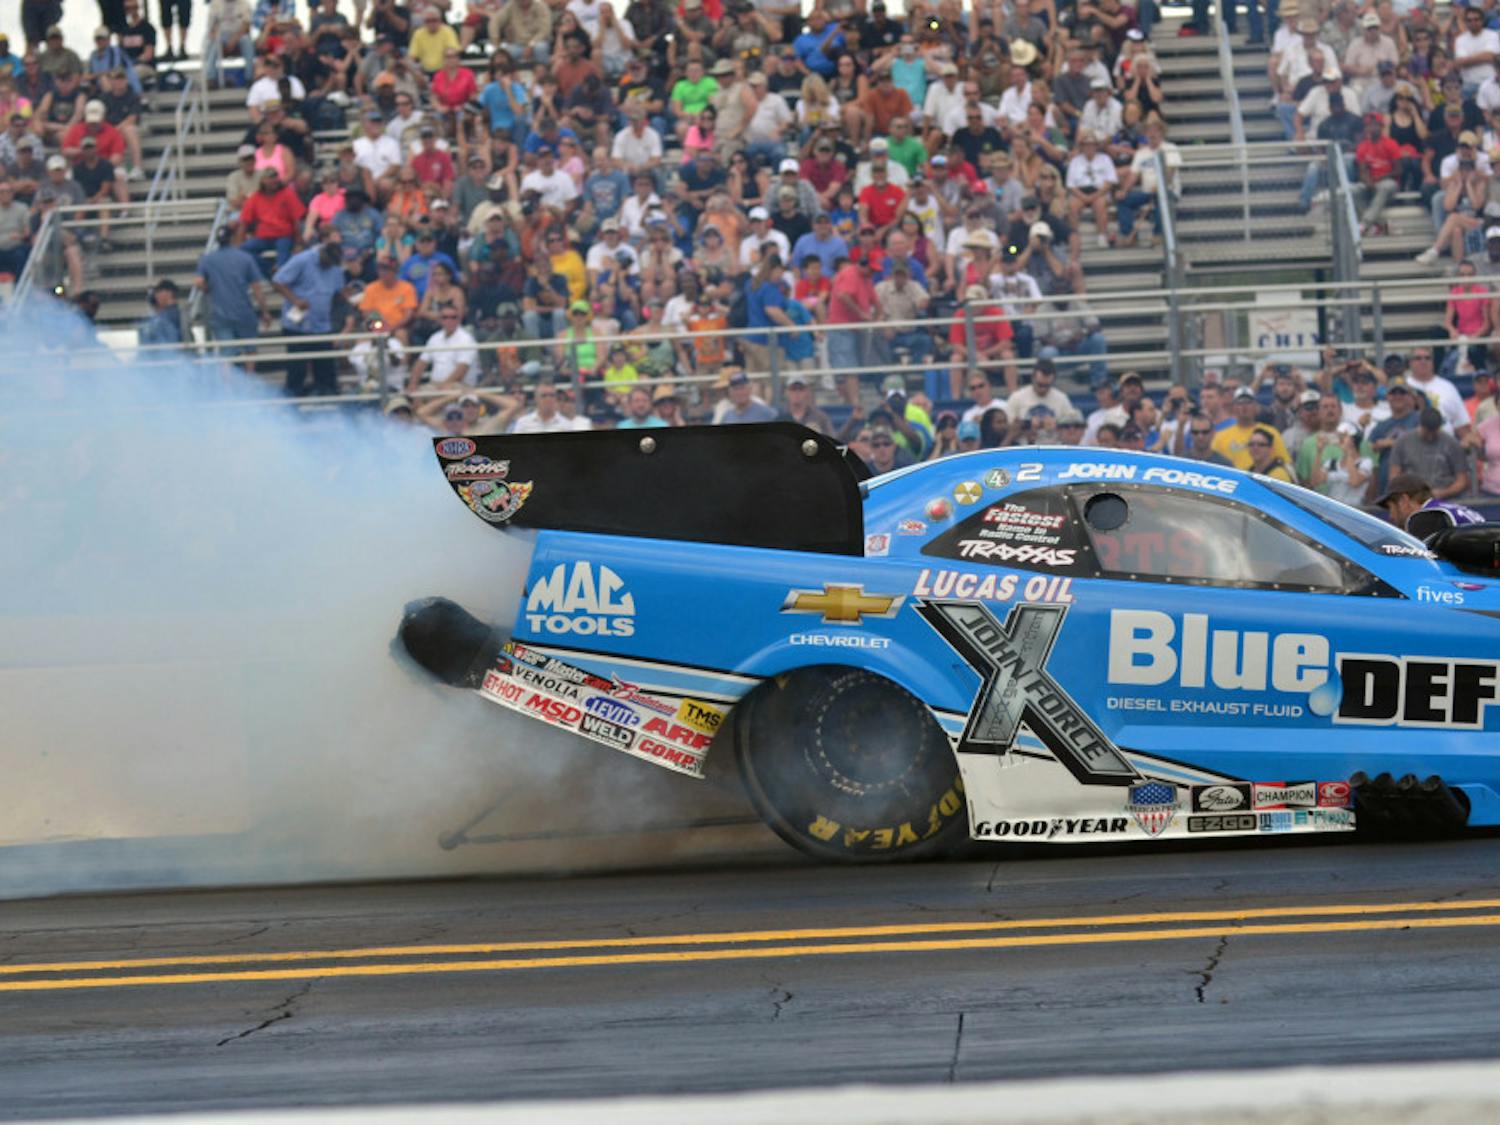 John Force races down the quarter-mile track at the Auto Plus Raceway in Gainesville during the 2015 Gatornationals on Saturday.